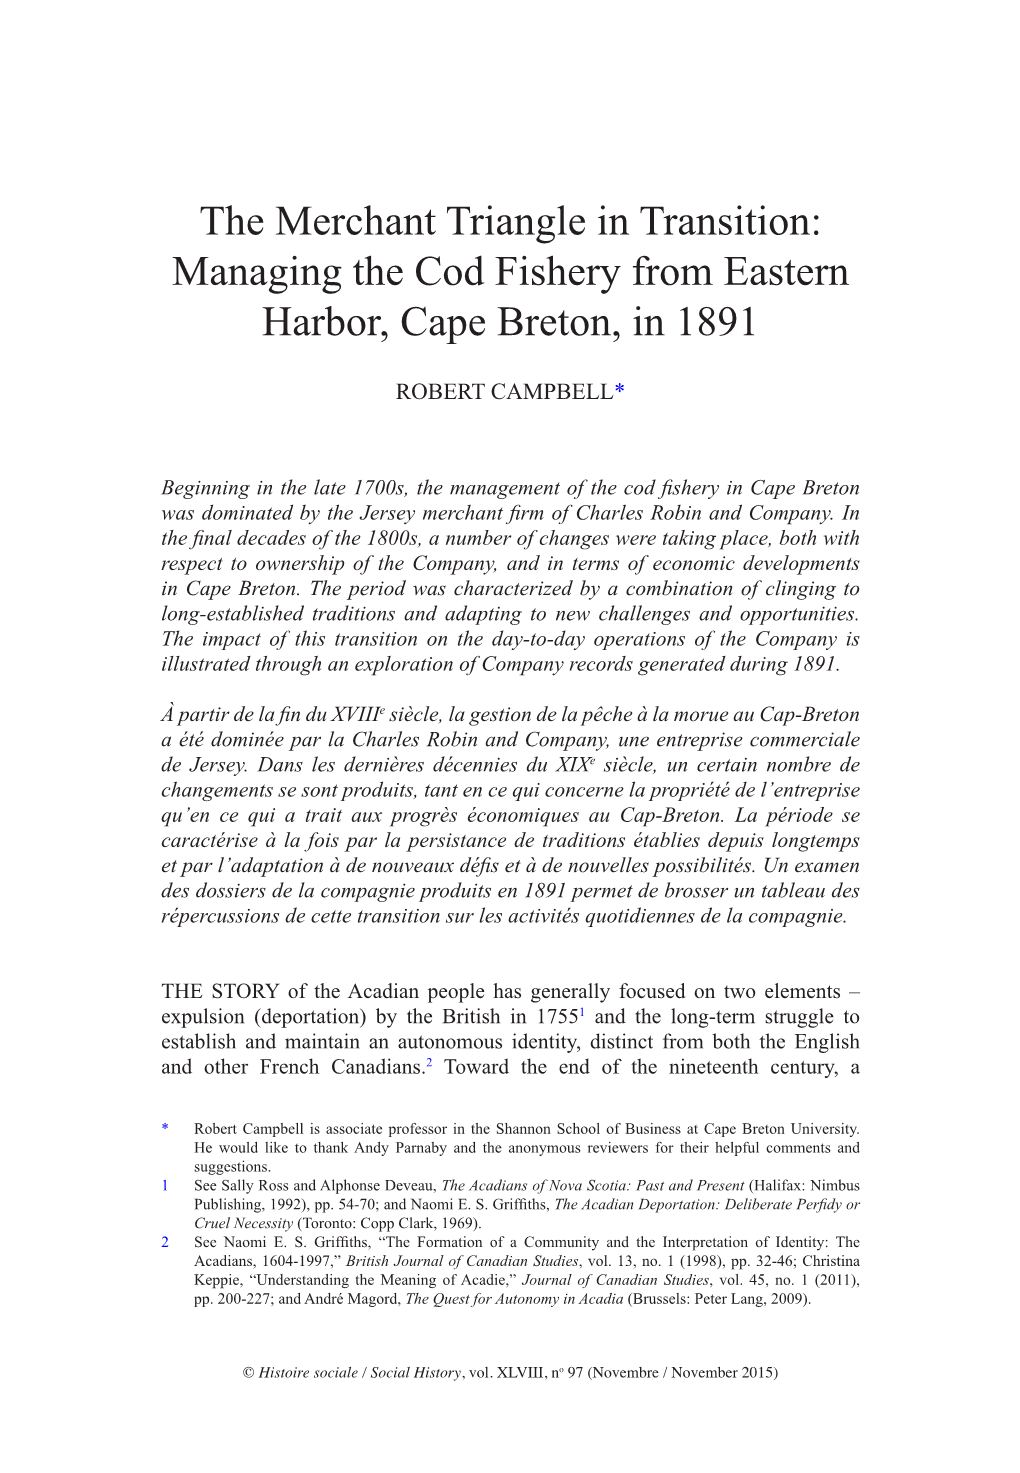 Managing the Cod Fishery from Eastern Harbor, Cape Breton, in 1891